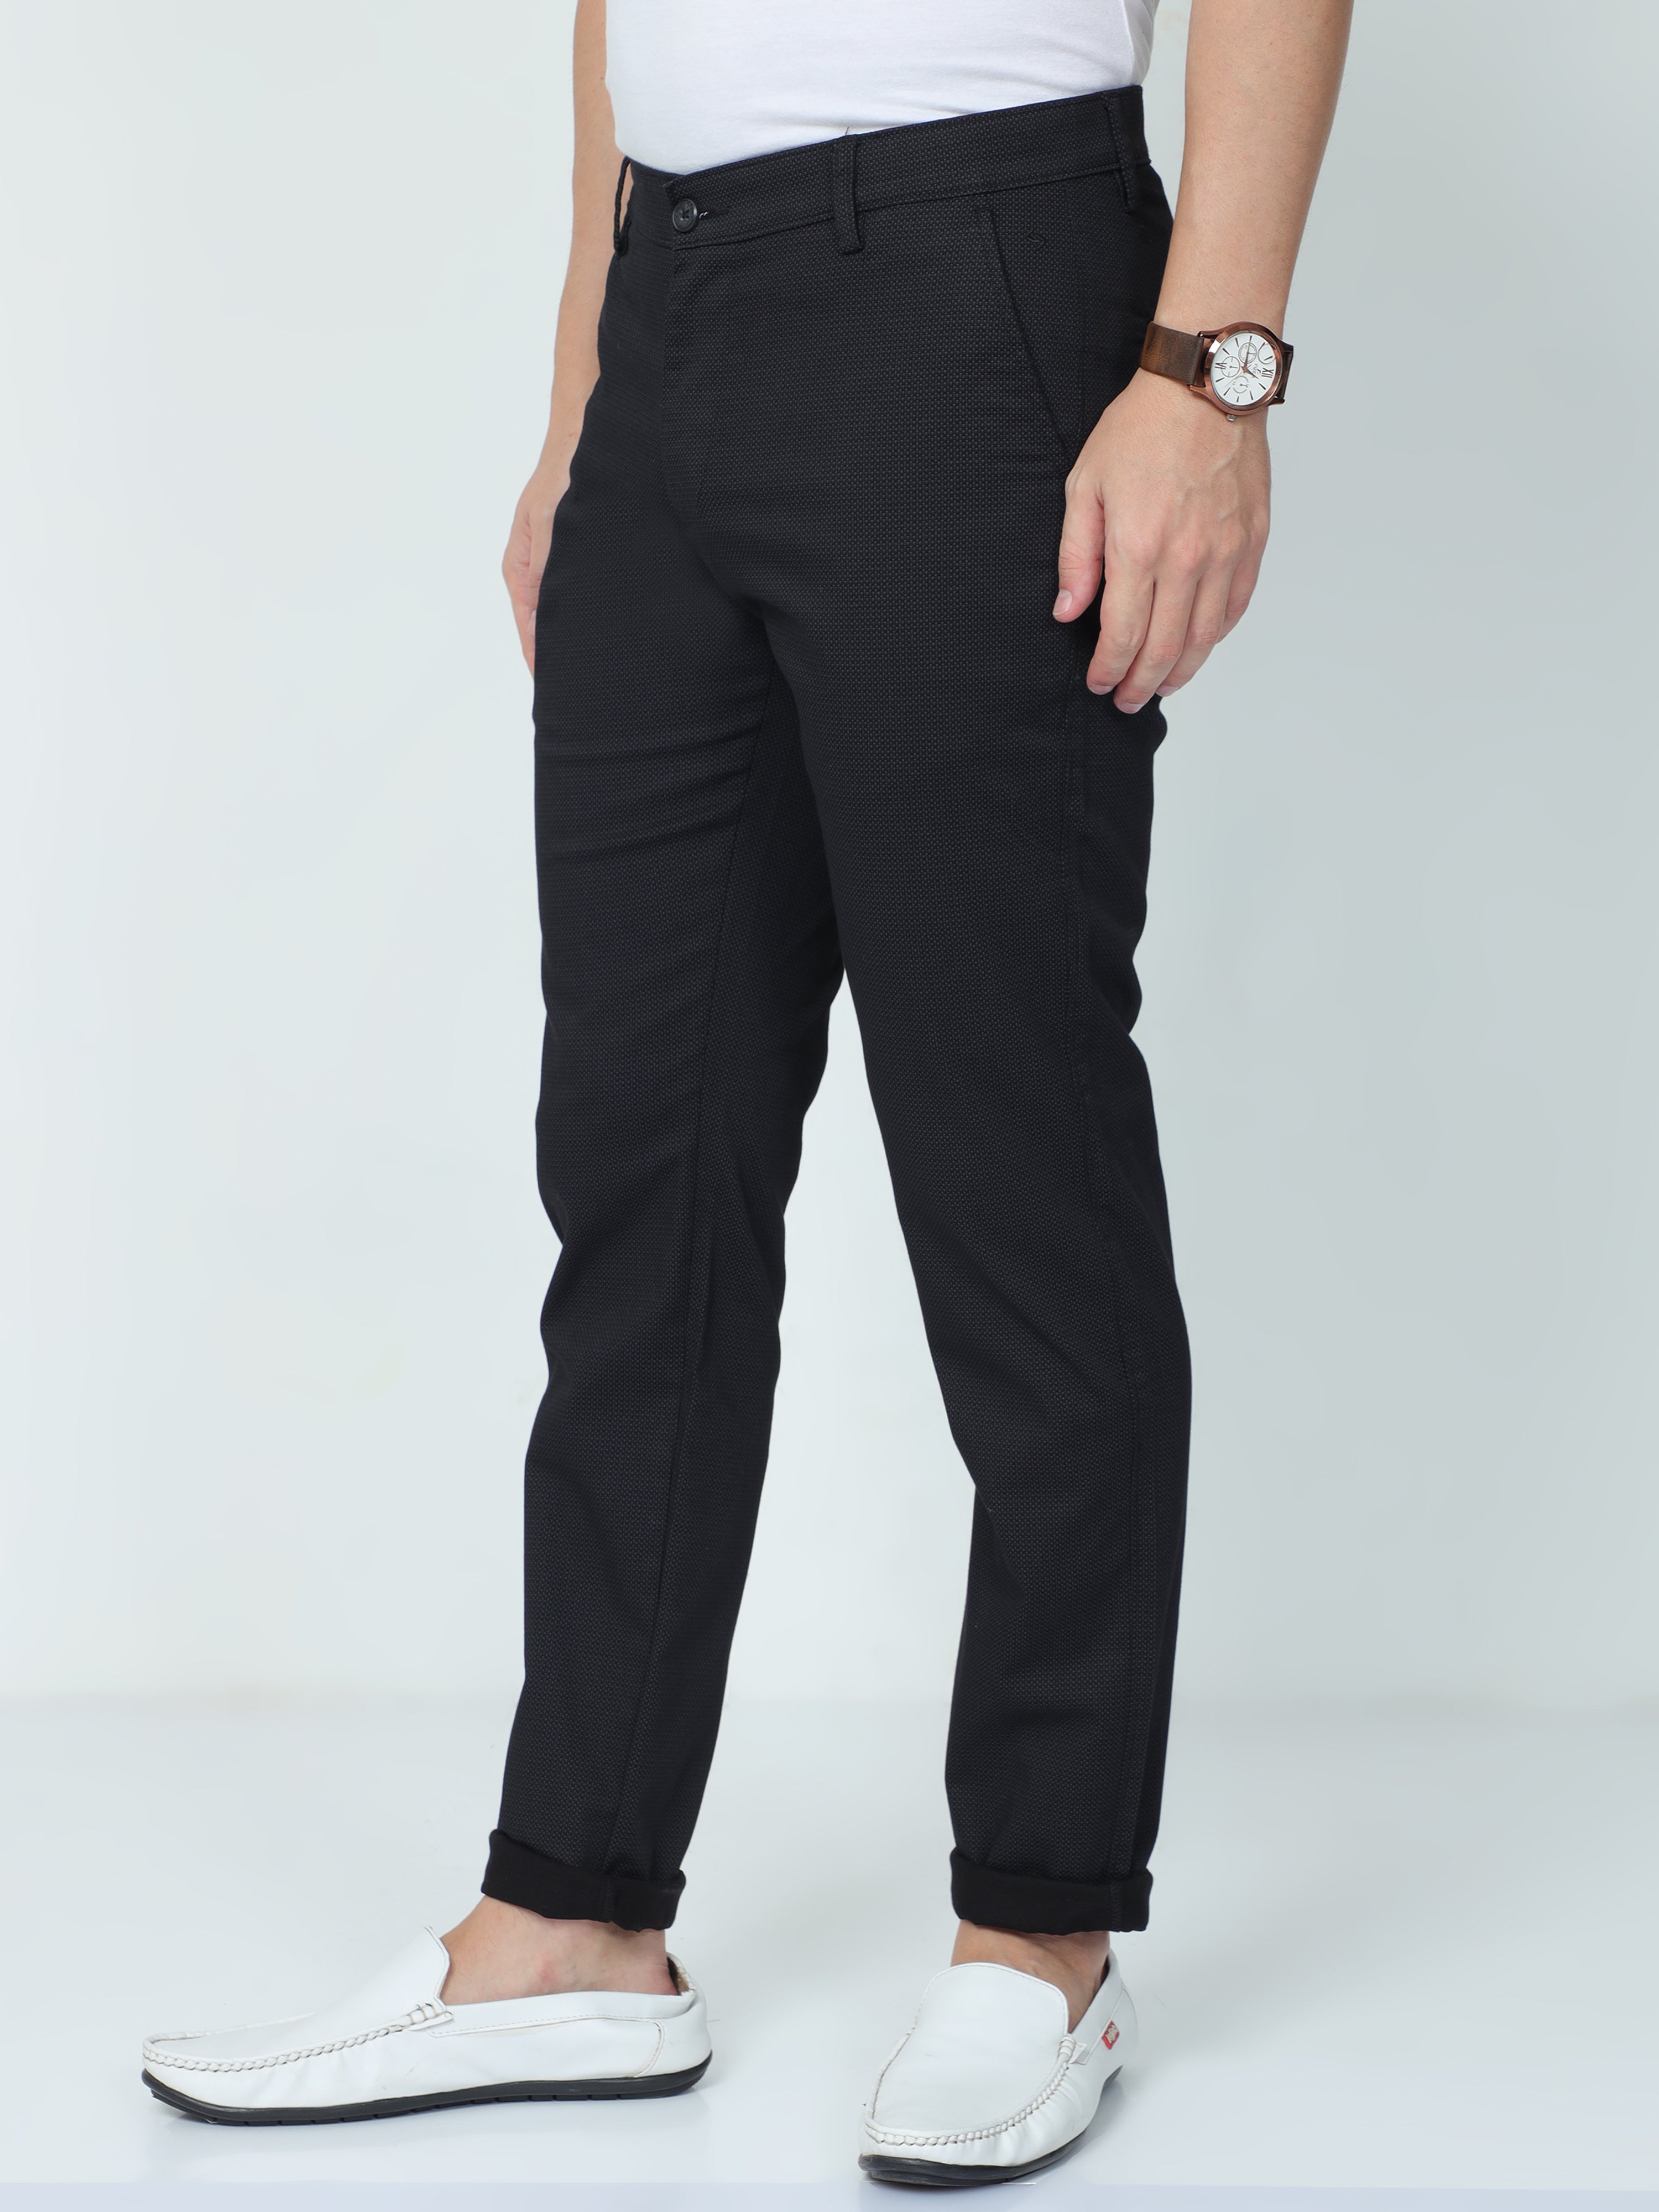 Classic Polo Mens Moderate Fit Dotted Black Color Trousers | To2-01 C-Blk-Mf-Ly